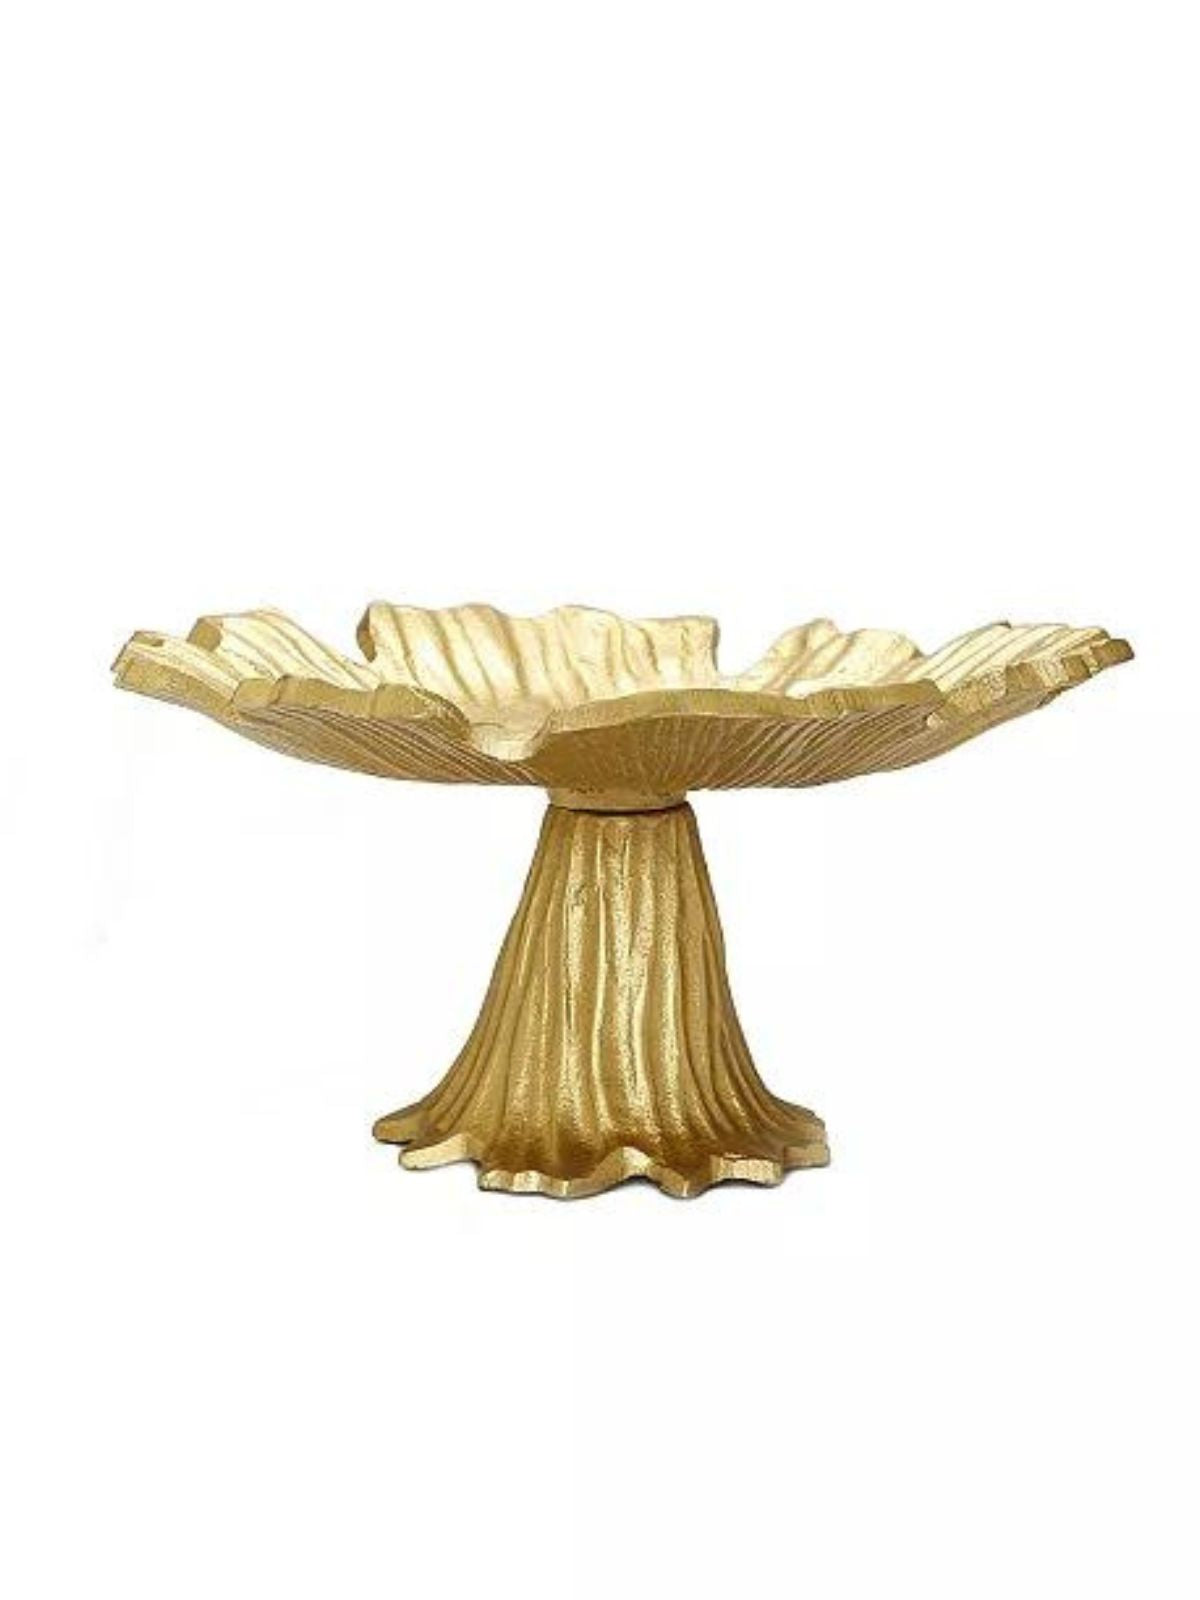 10.75D Stainless Steel flower cake plate with flashy Gold color, Sold by KYA Home Decor